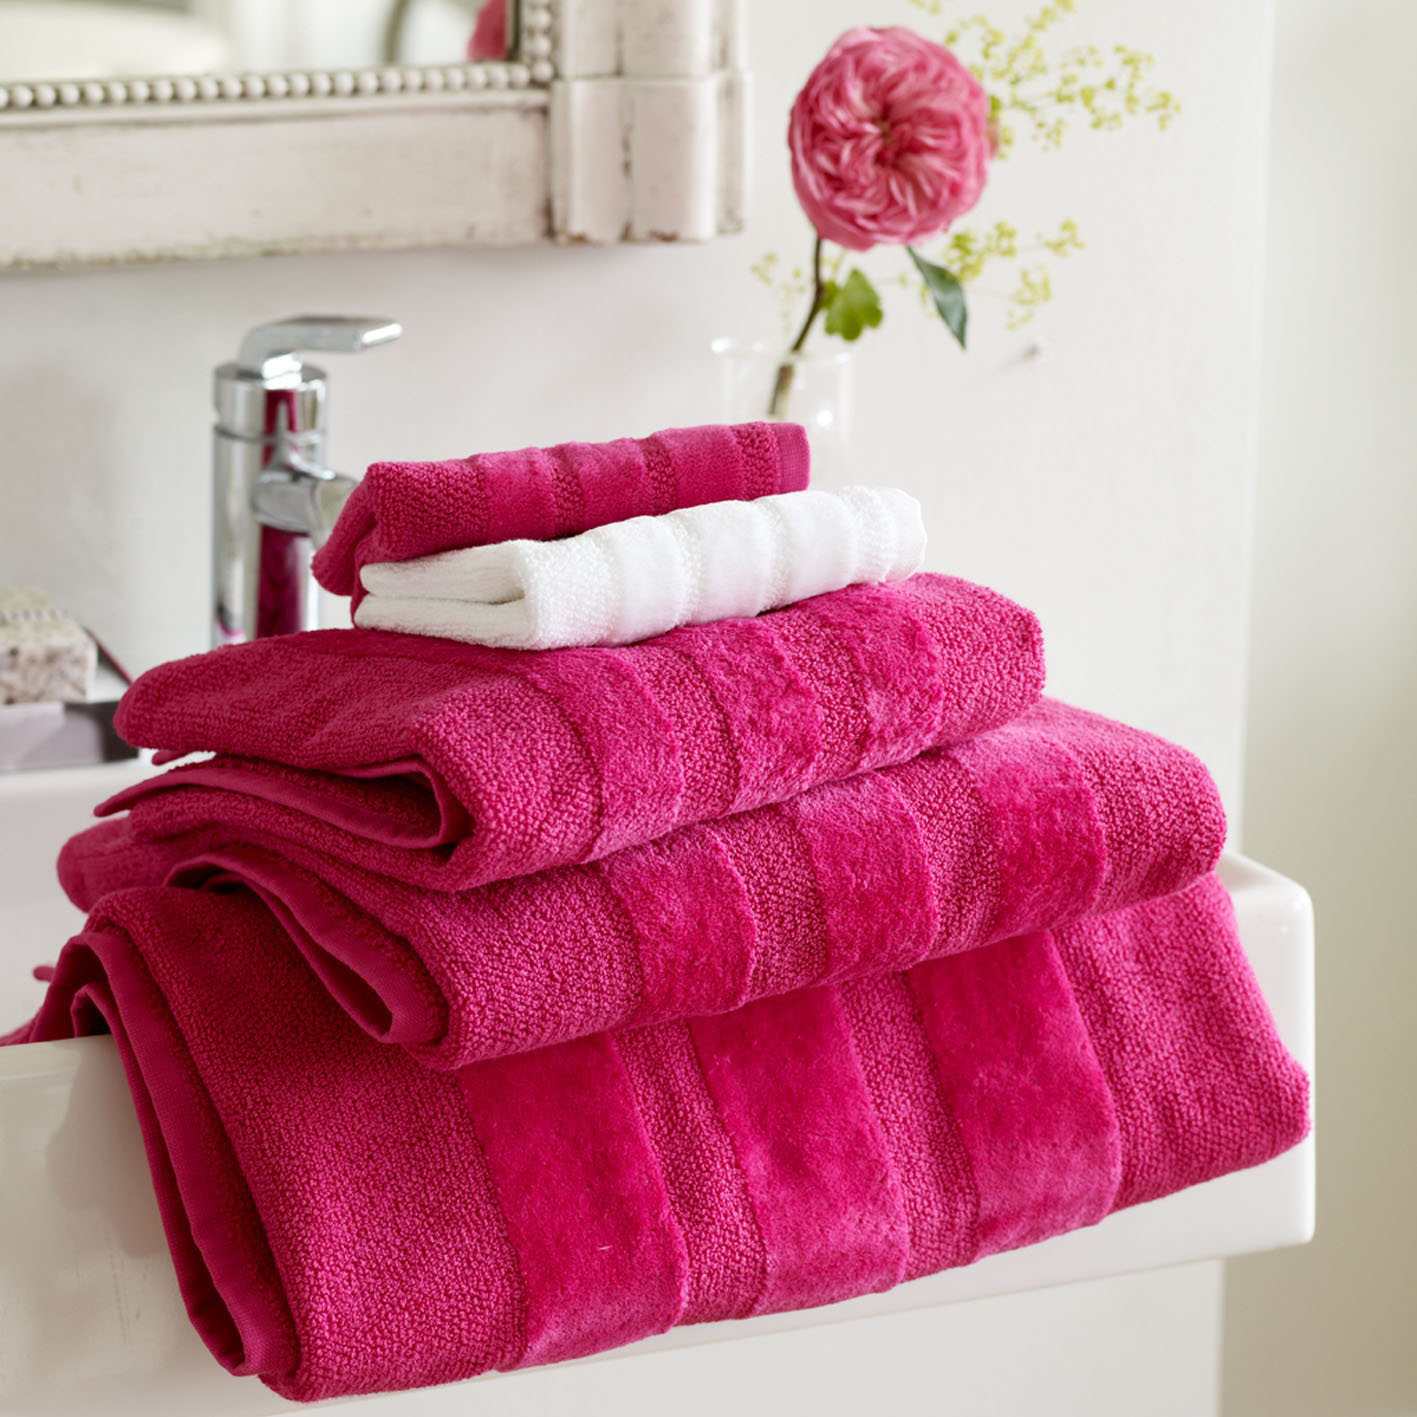 Hard Goods Towels and Robes Buying Agency in Panipat